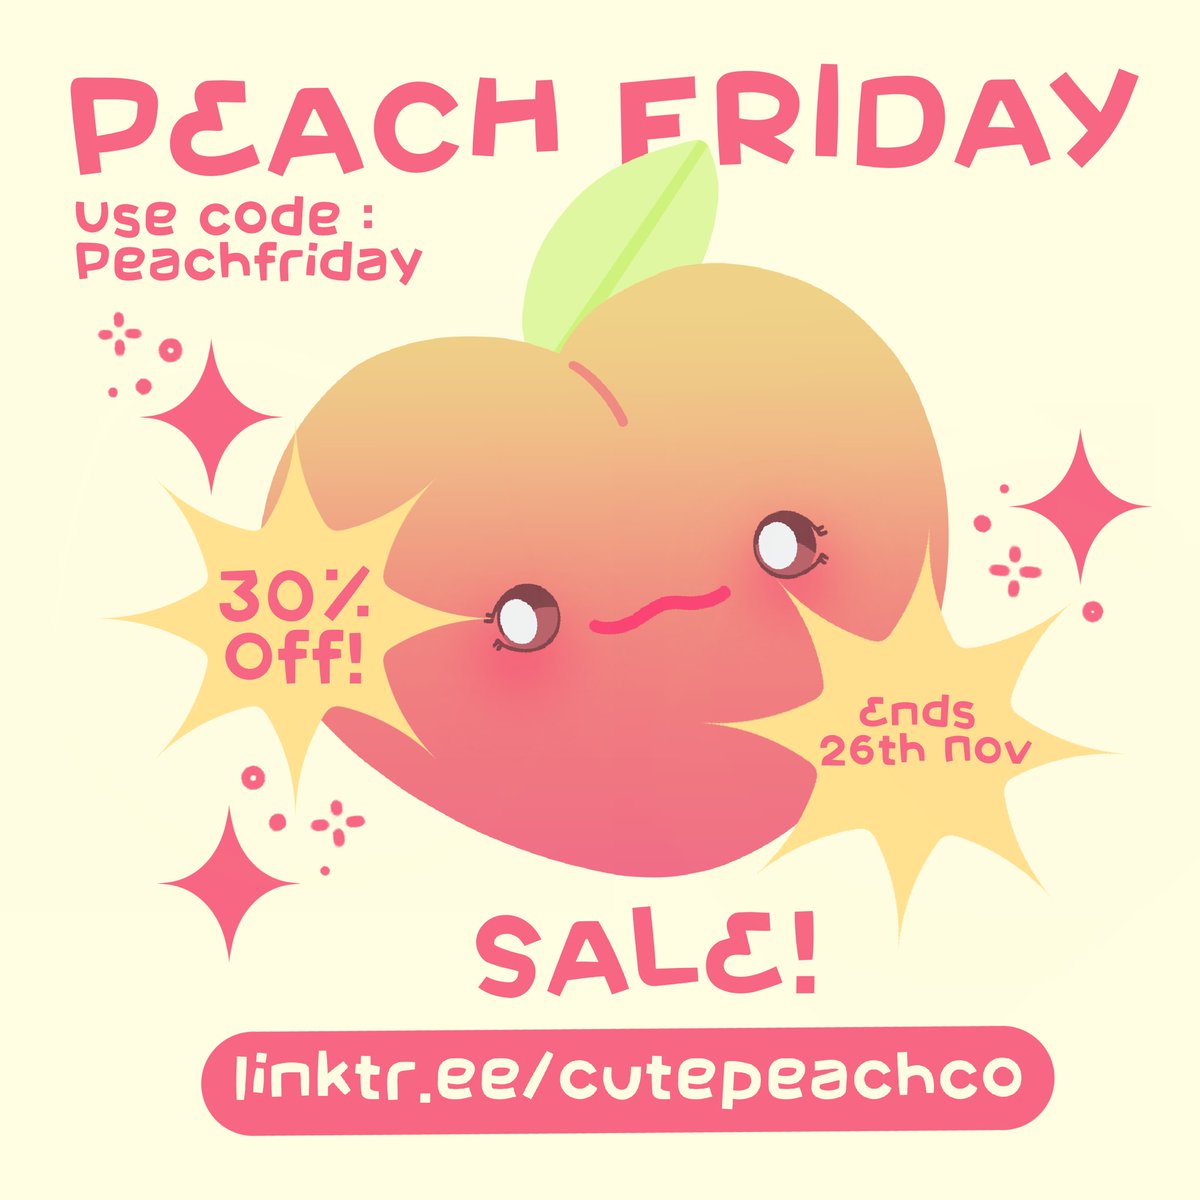 30% off all items storewide! 💗
(use code : PEACHFRIDAY) + every order comes with a free unreleased sticker design (My Melody Hoshi)! ✨
Ends 26th November!
India : shop-cutepeachco.mini.store
Intl : shopcutepeachco.etsy.com